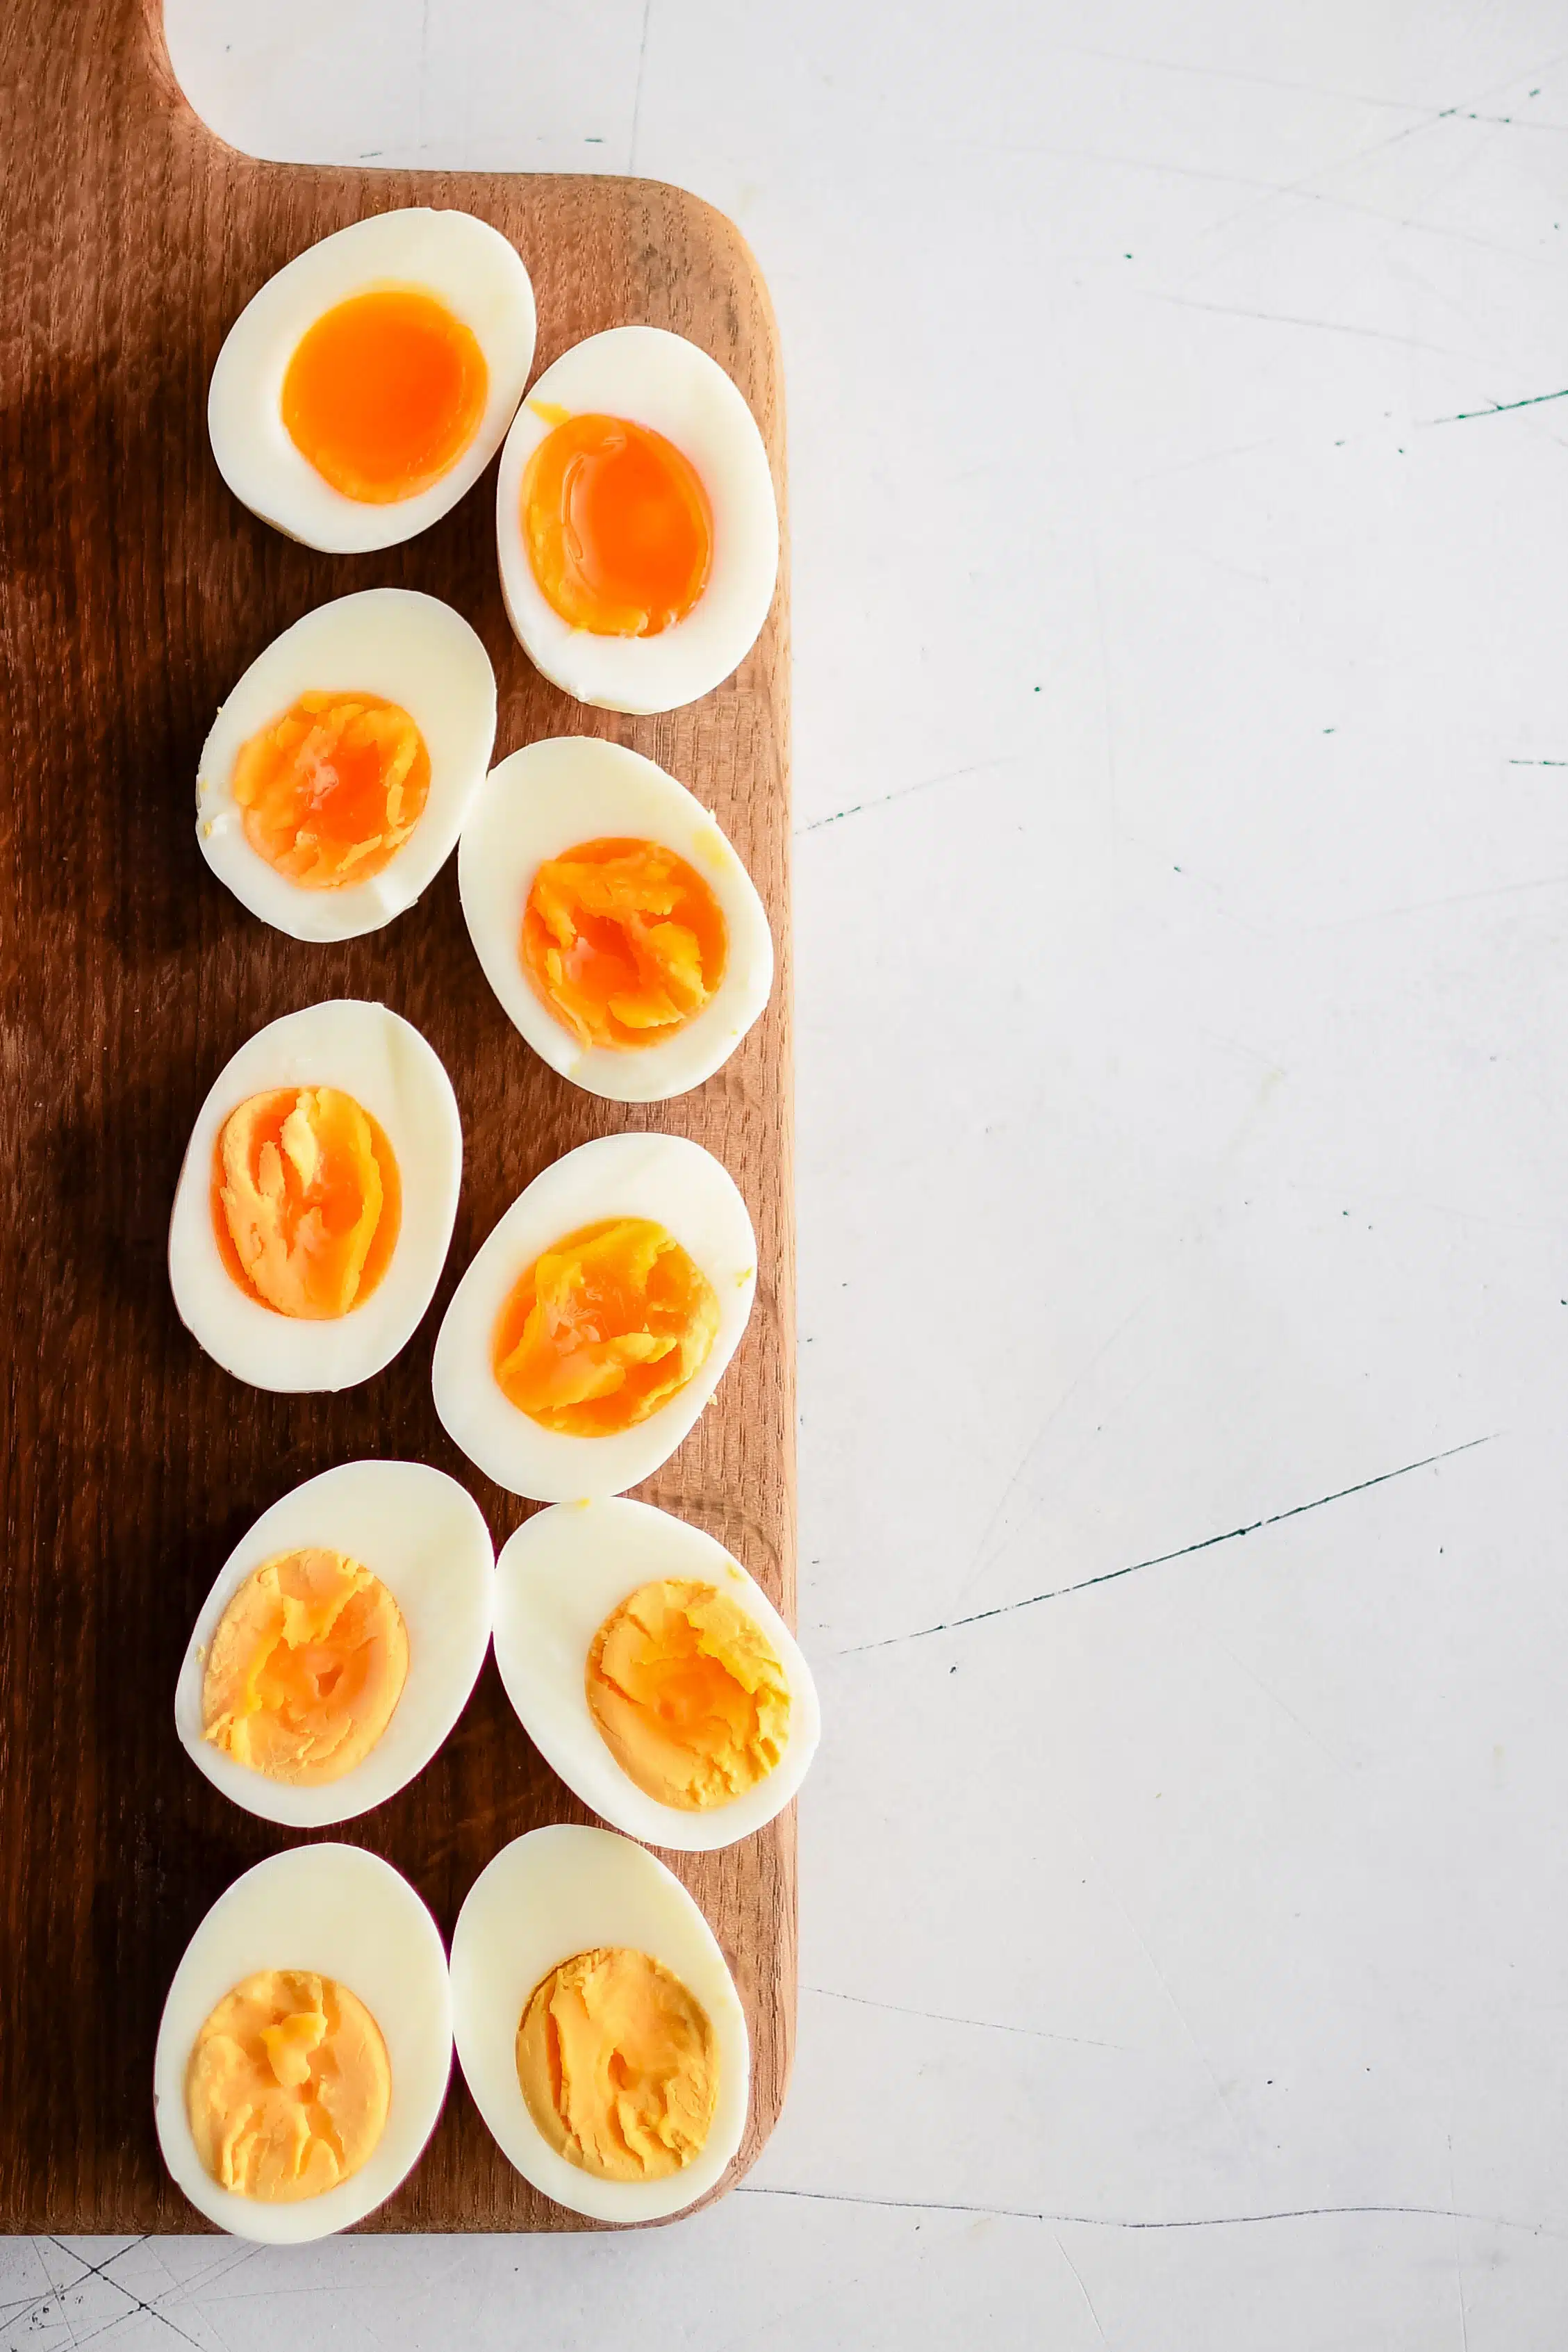 Halved hard boiled eggs on a wooden cutting board displaying the difference between the yolks from six minutes cook time to twelve minutes.